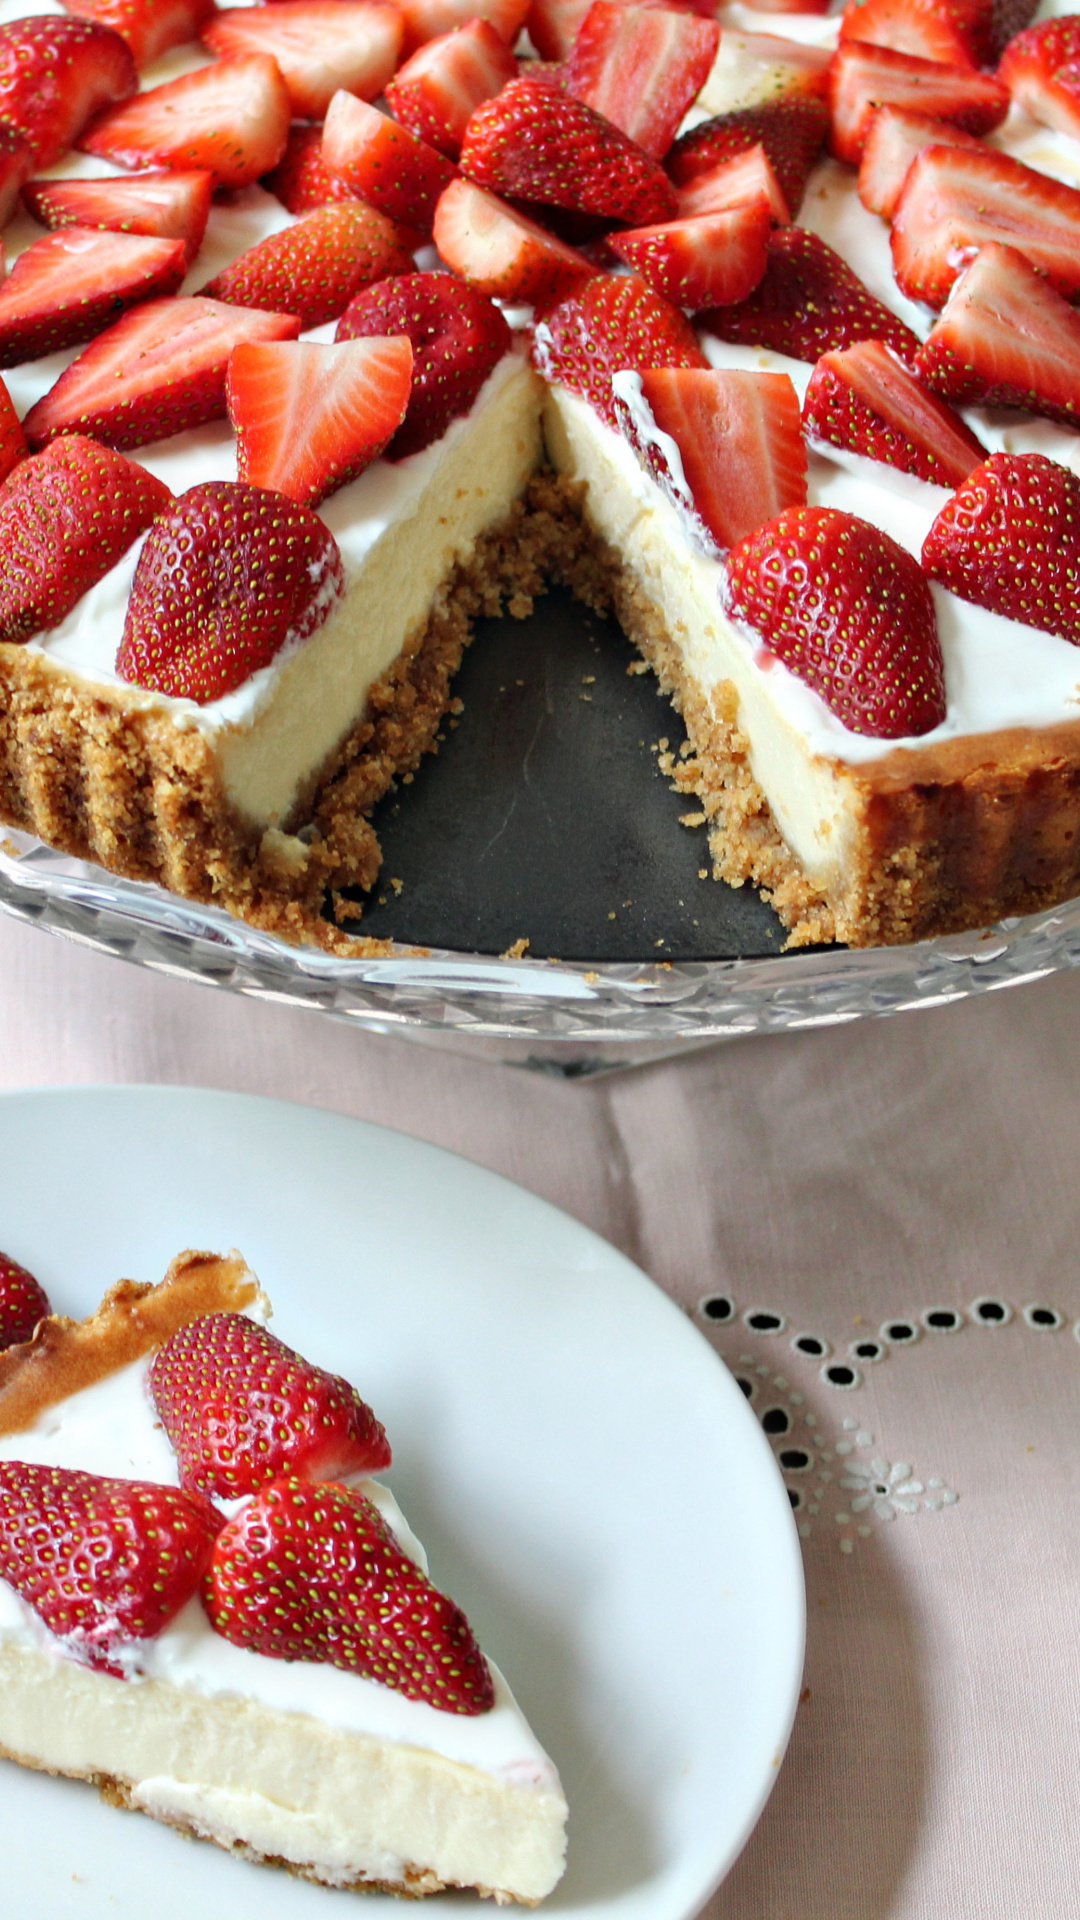 Cheesecake: Usually baked in a graham cracker crust. 1080x1920 Full HD Wallpaper.